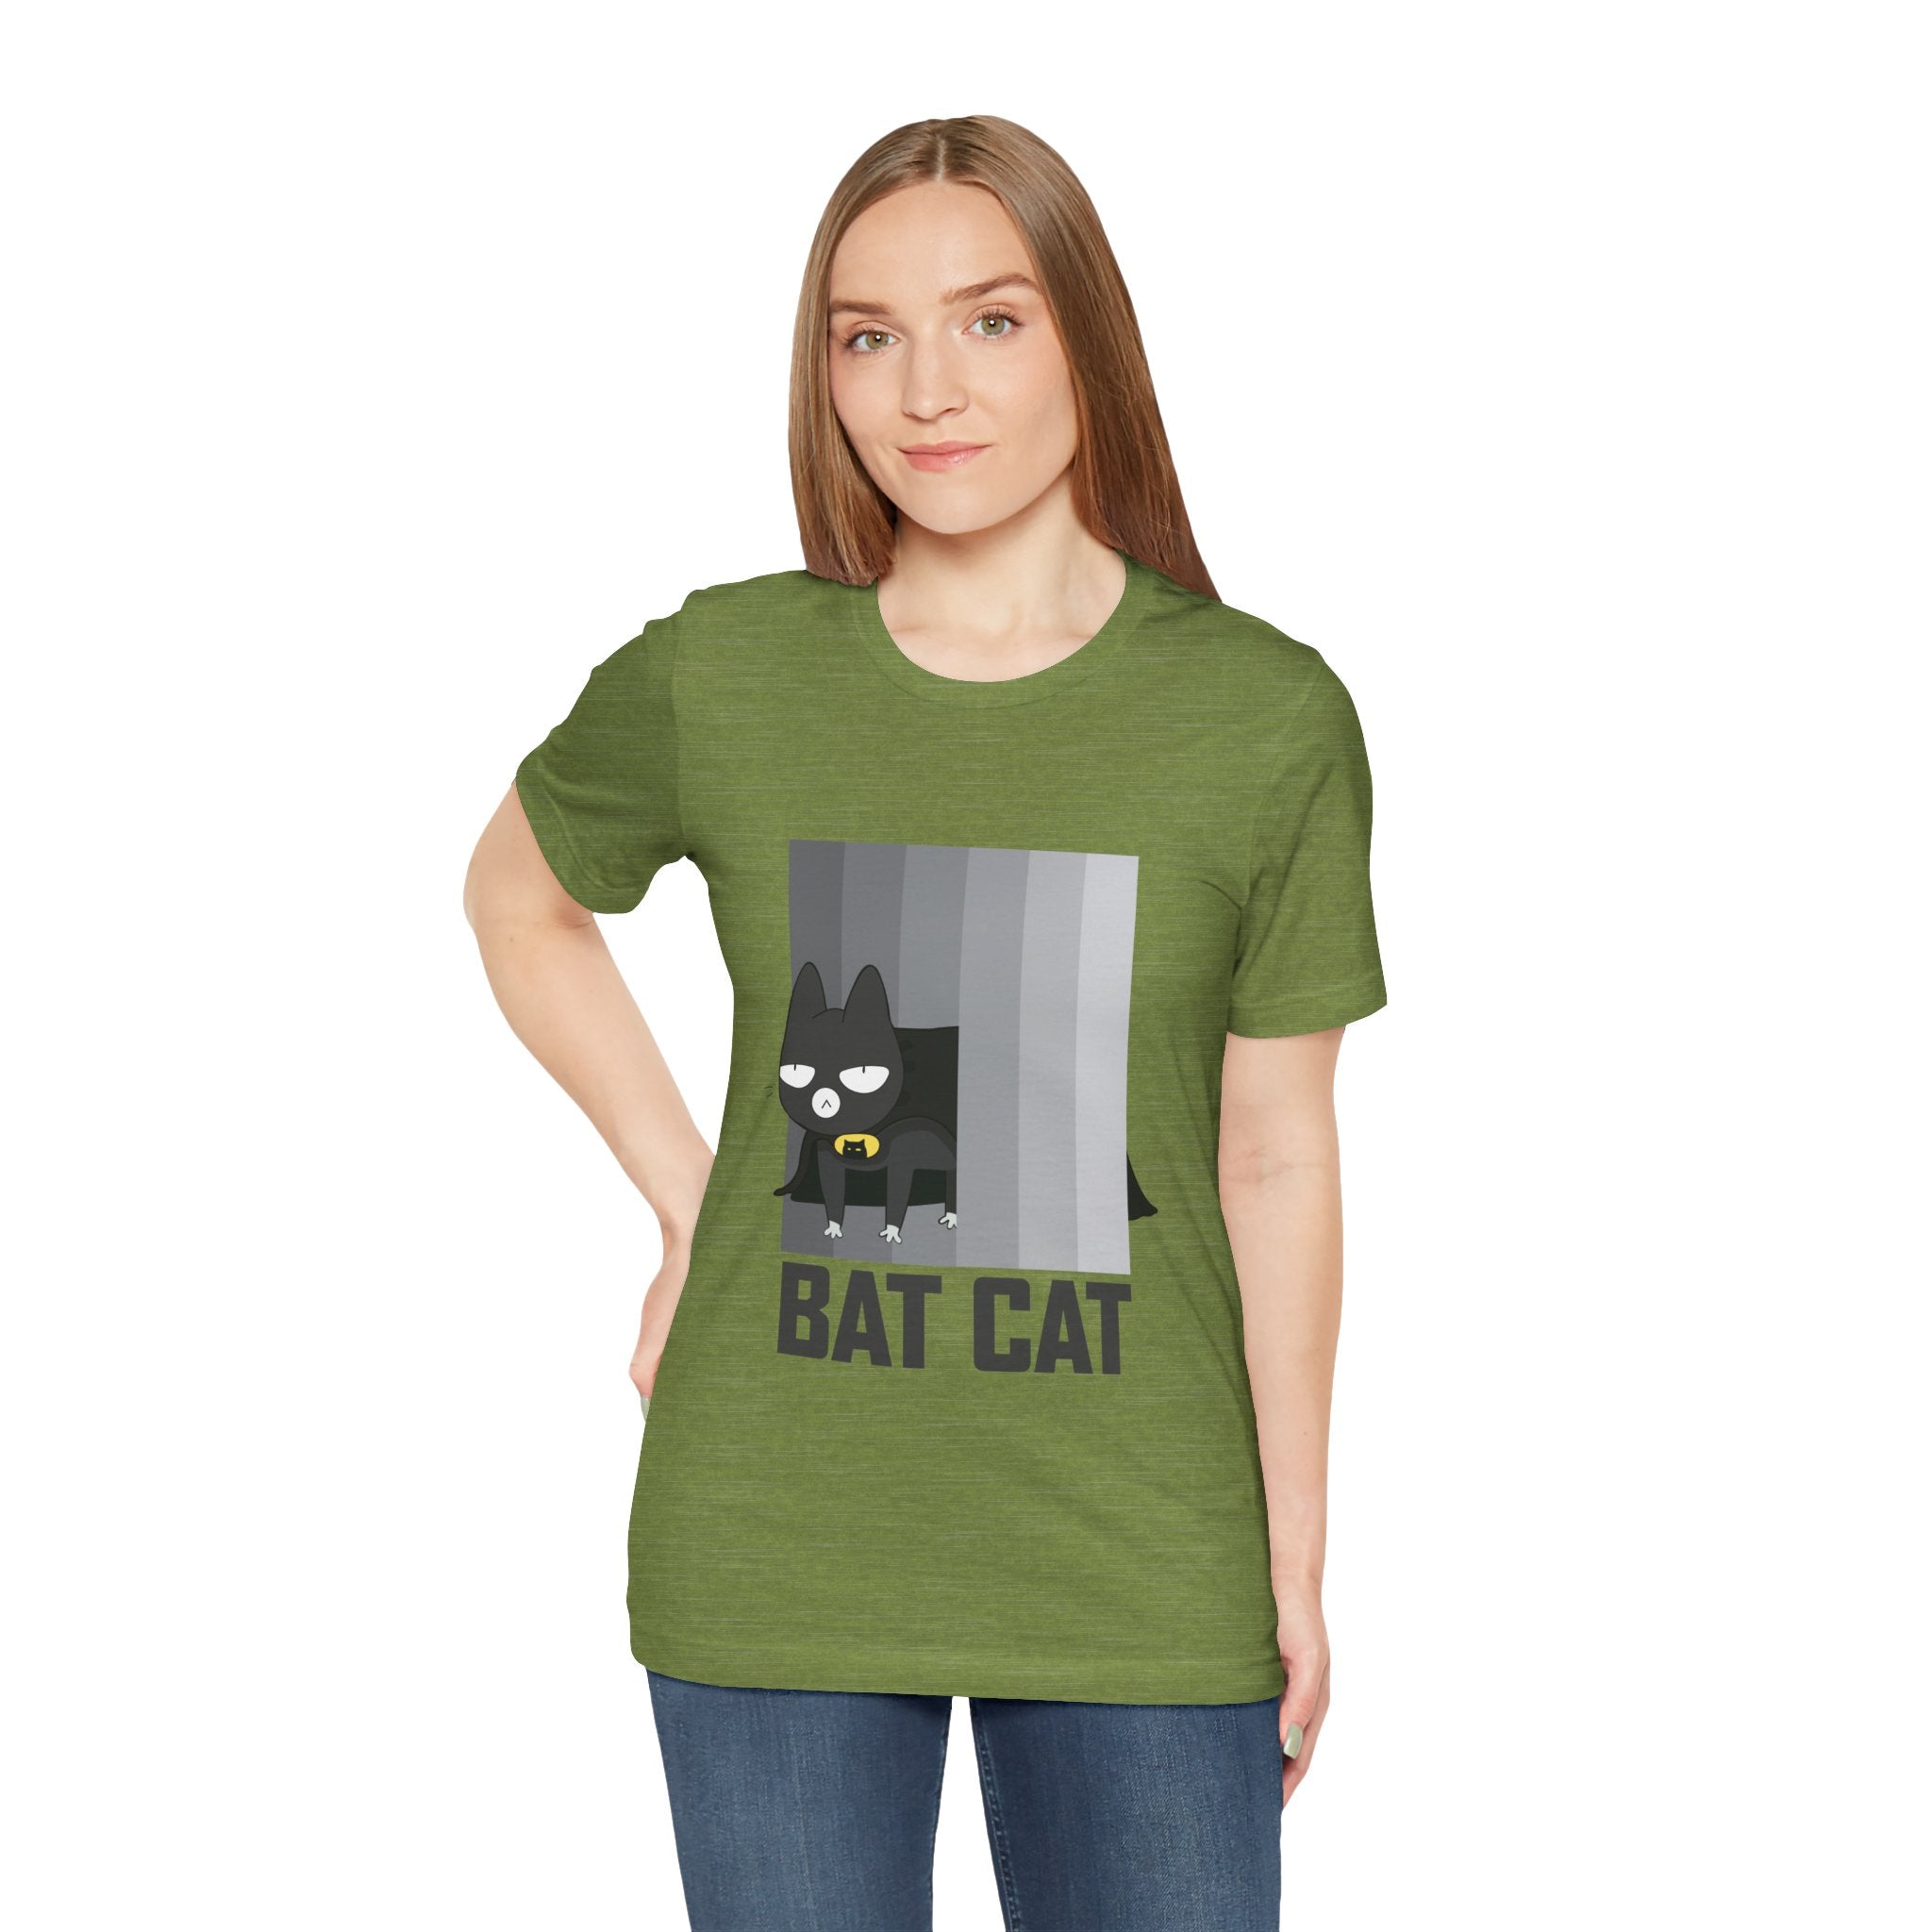 A woman in a green unisex tee with a BATCAT T-Shirt graphic design, standing against a plain background.